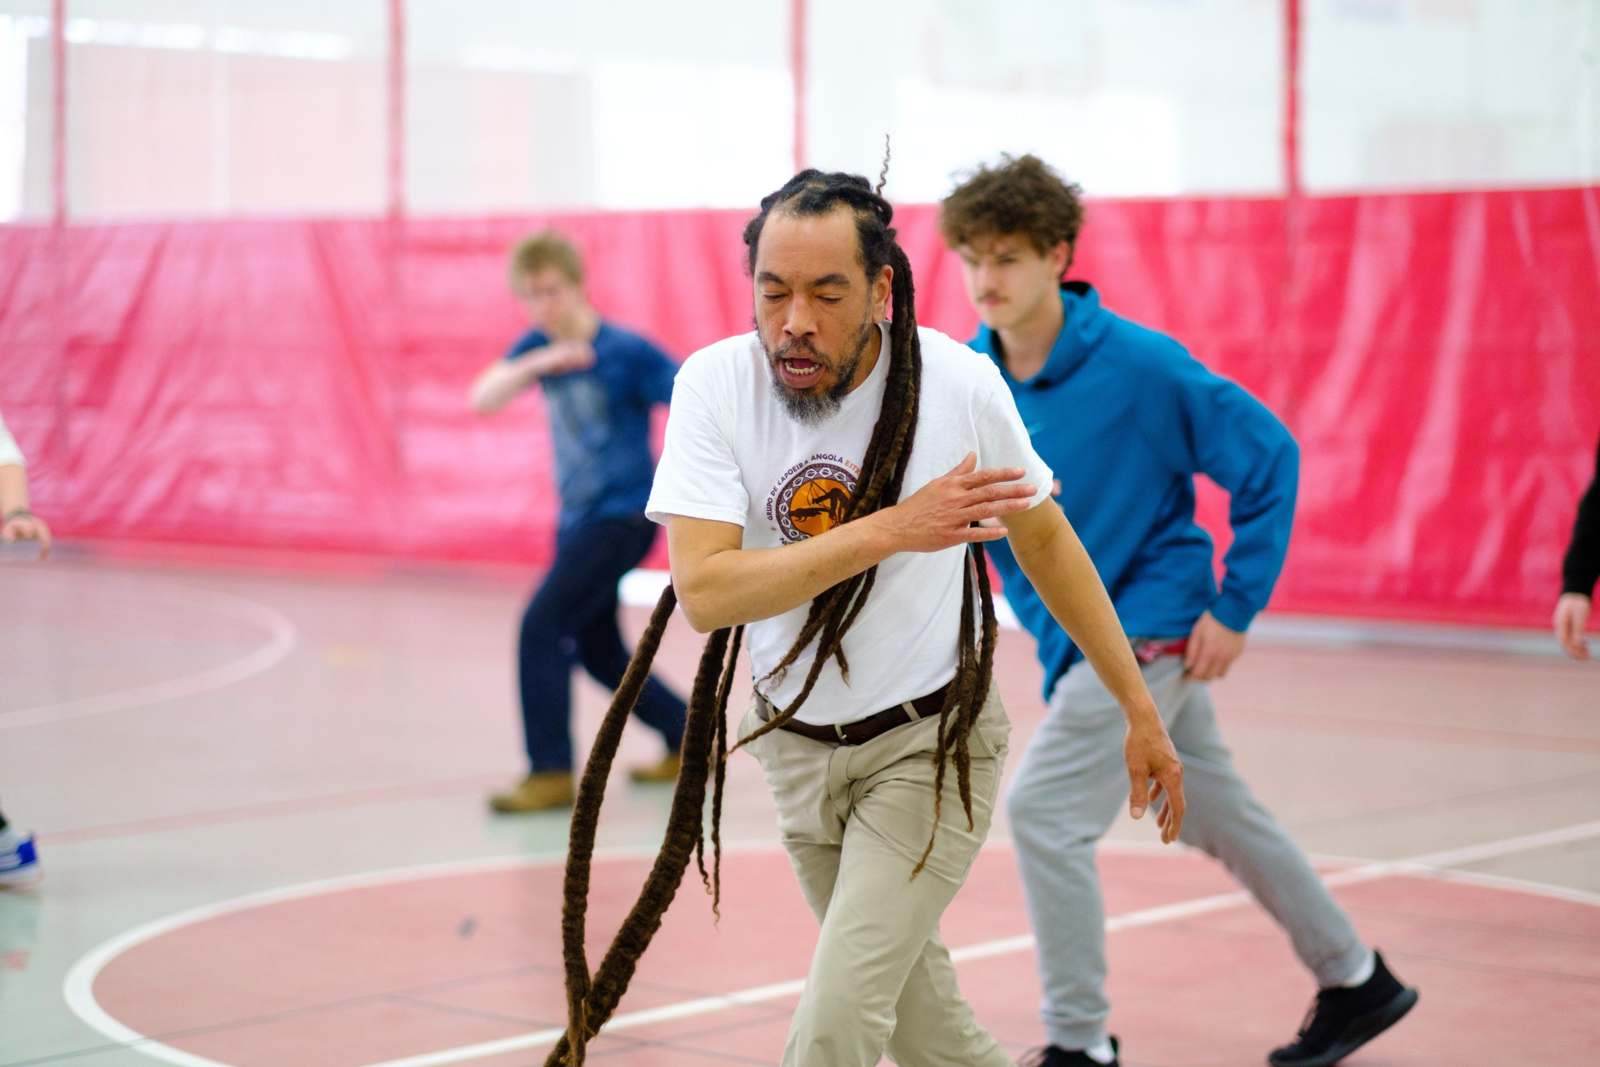 a man with long dreadlocks dancing on a court